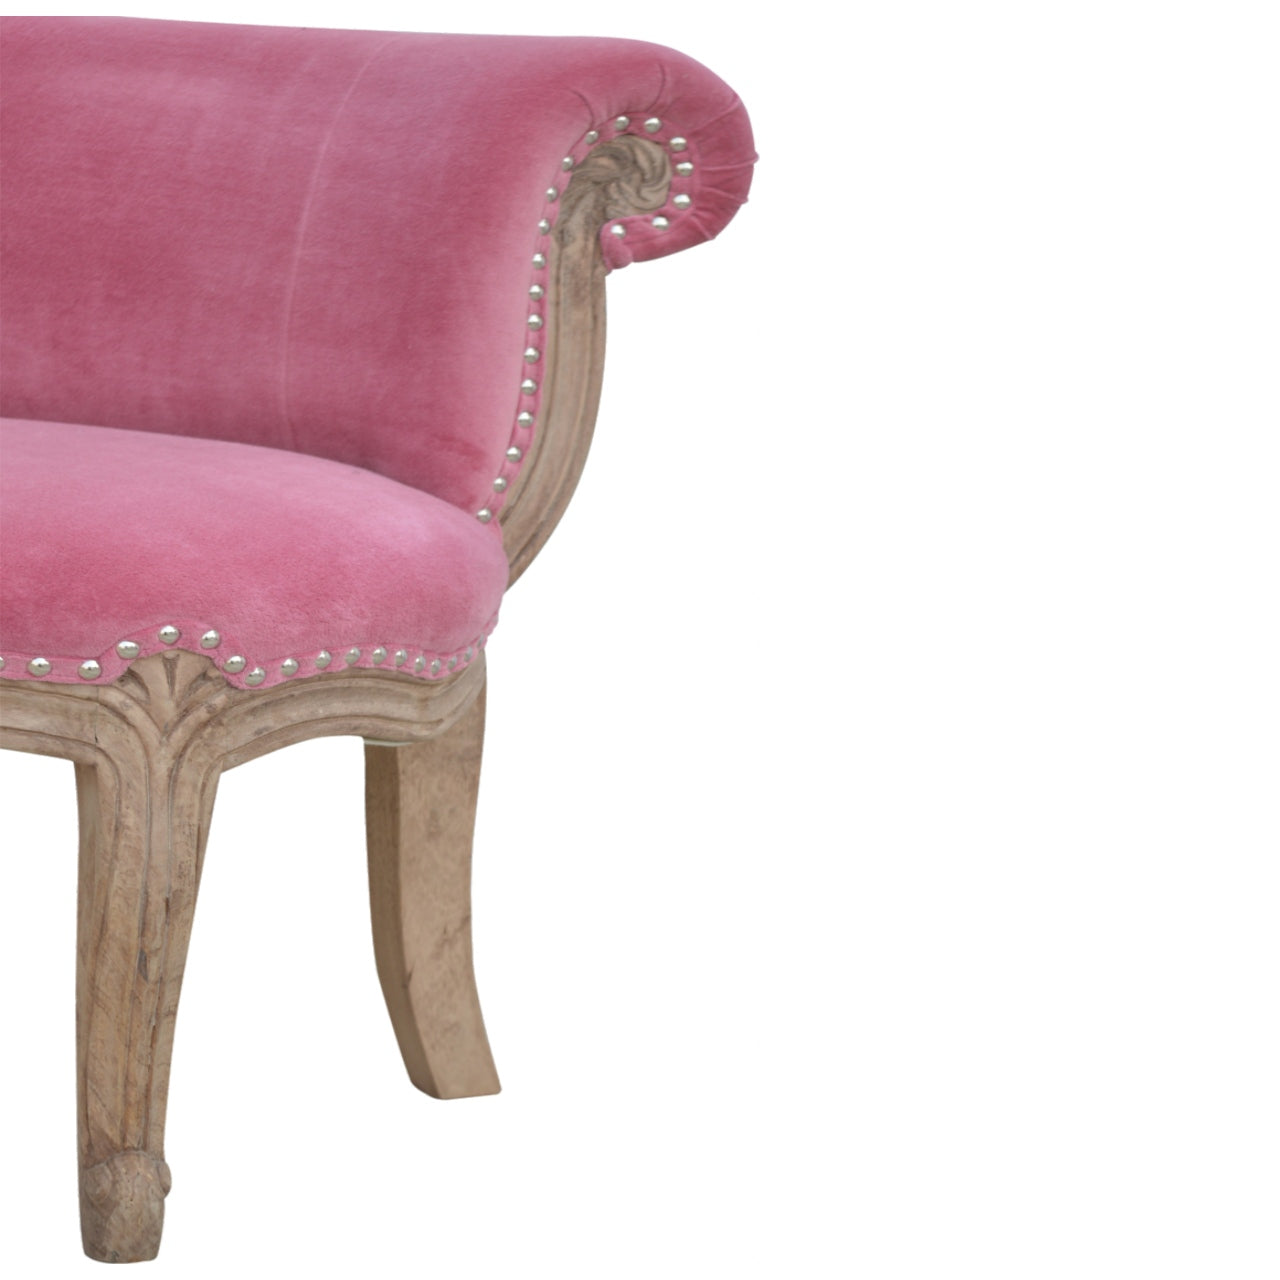 petite french chair in pink velvet